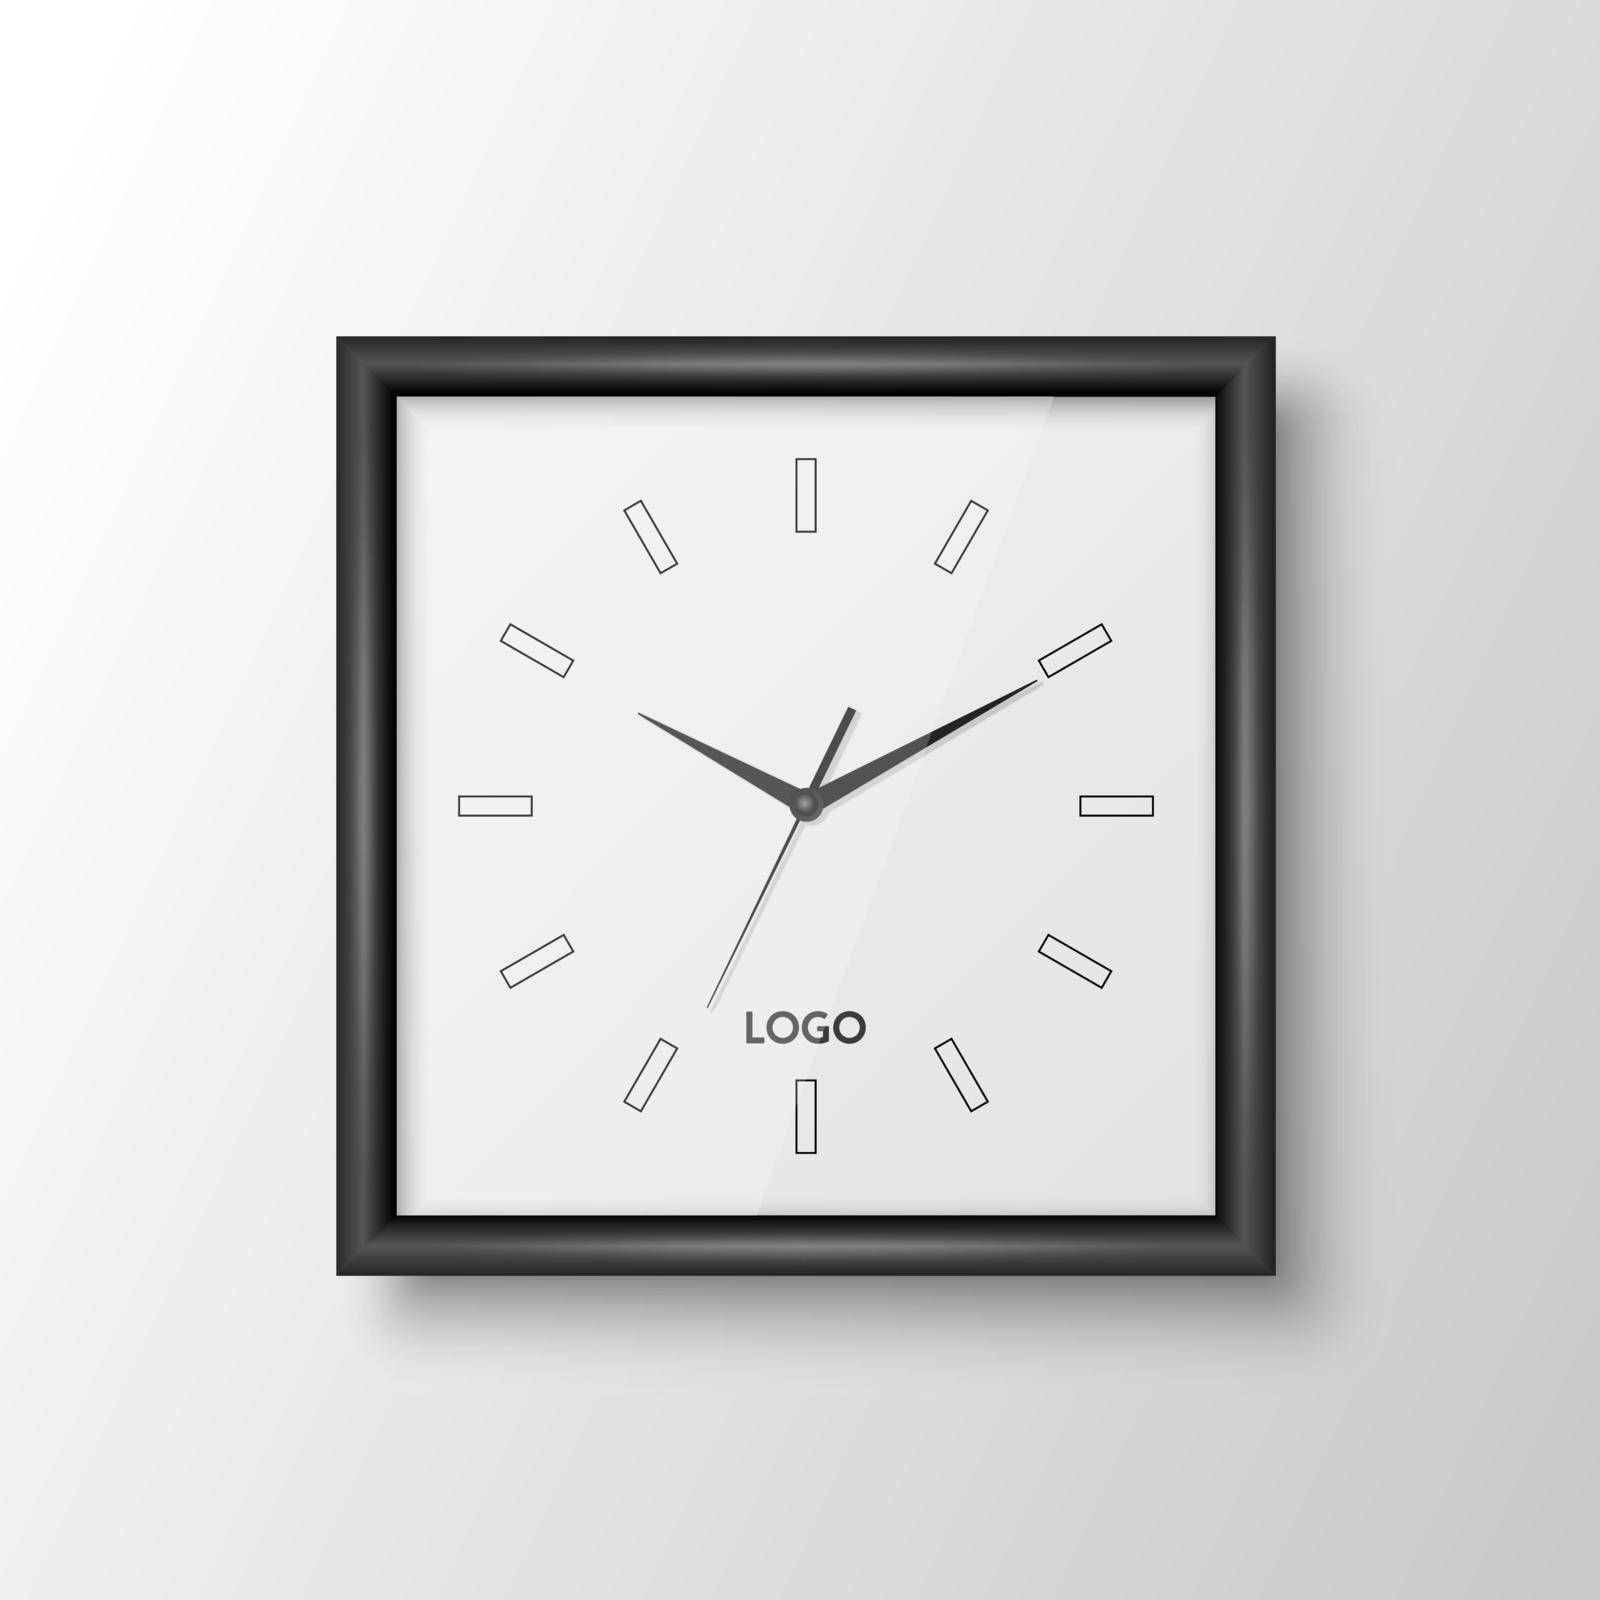 Vector 3d Realistic Square Wall Office Clock with Black Frame, Design Template Isolated on White. Dial with Roman Numerals. Mock-up of Wall Clock for Branding and Advertise Isolated. Clock Face Design.